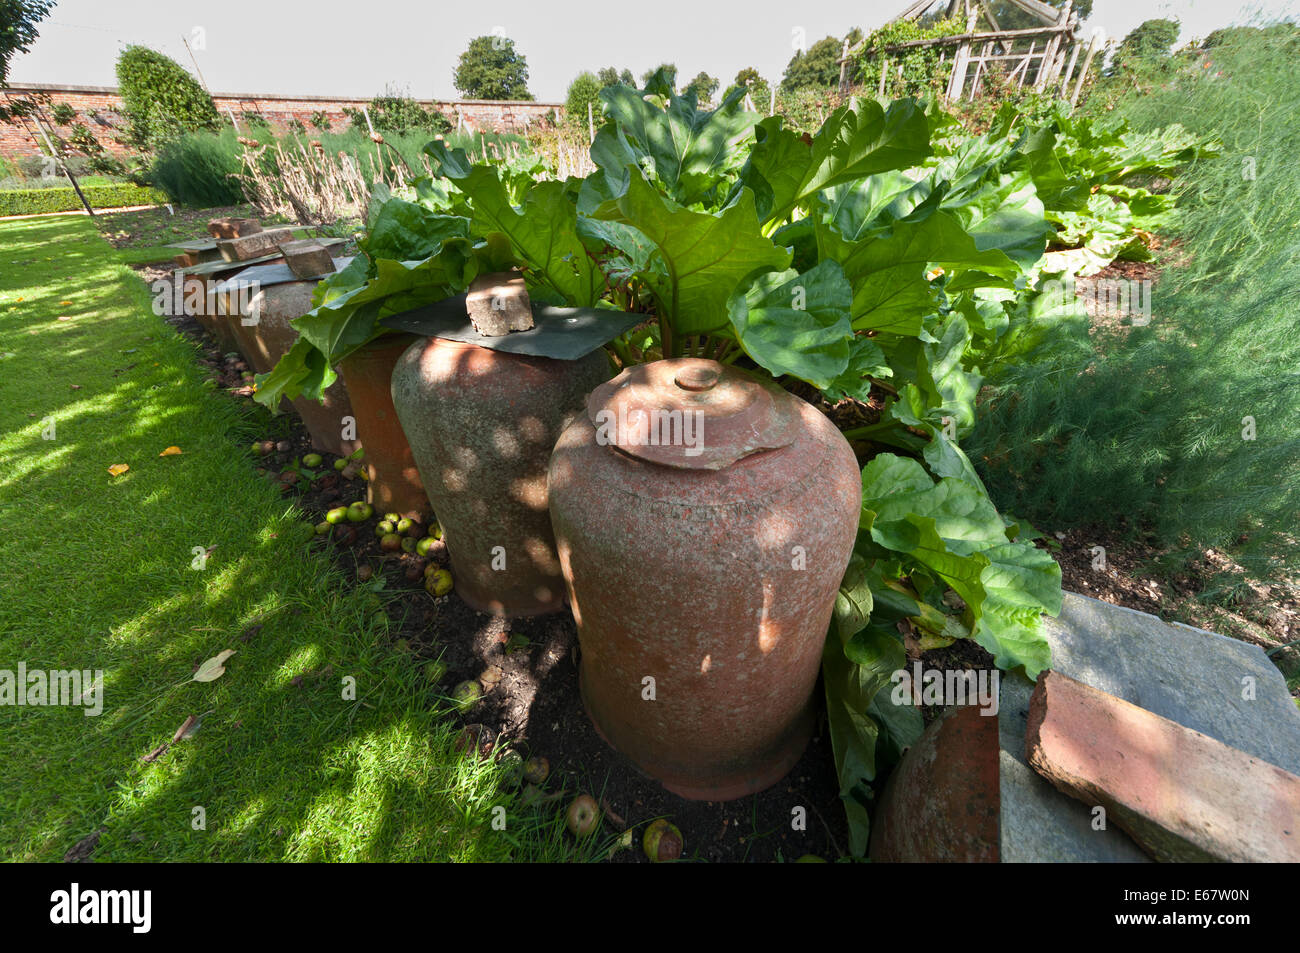 forcing rhubarb Terracotta bell jars cloches Stock Photo